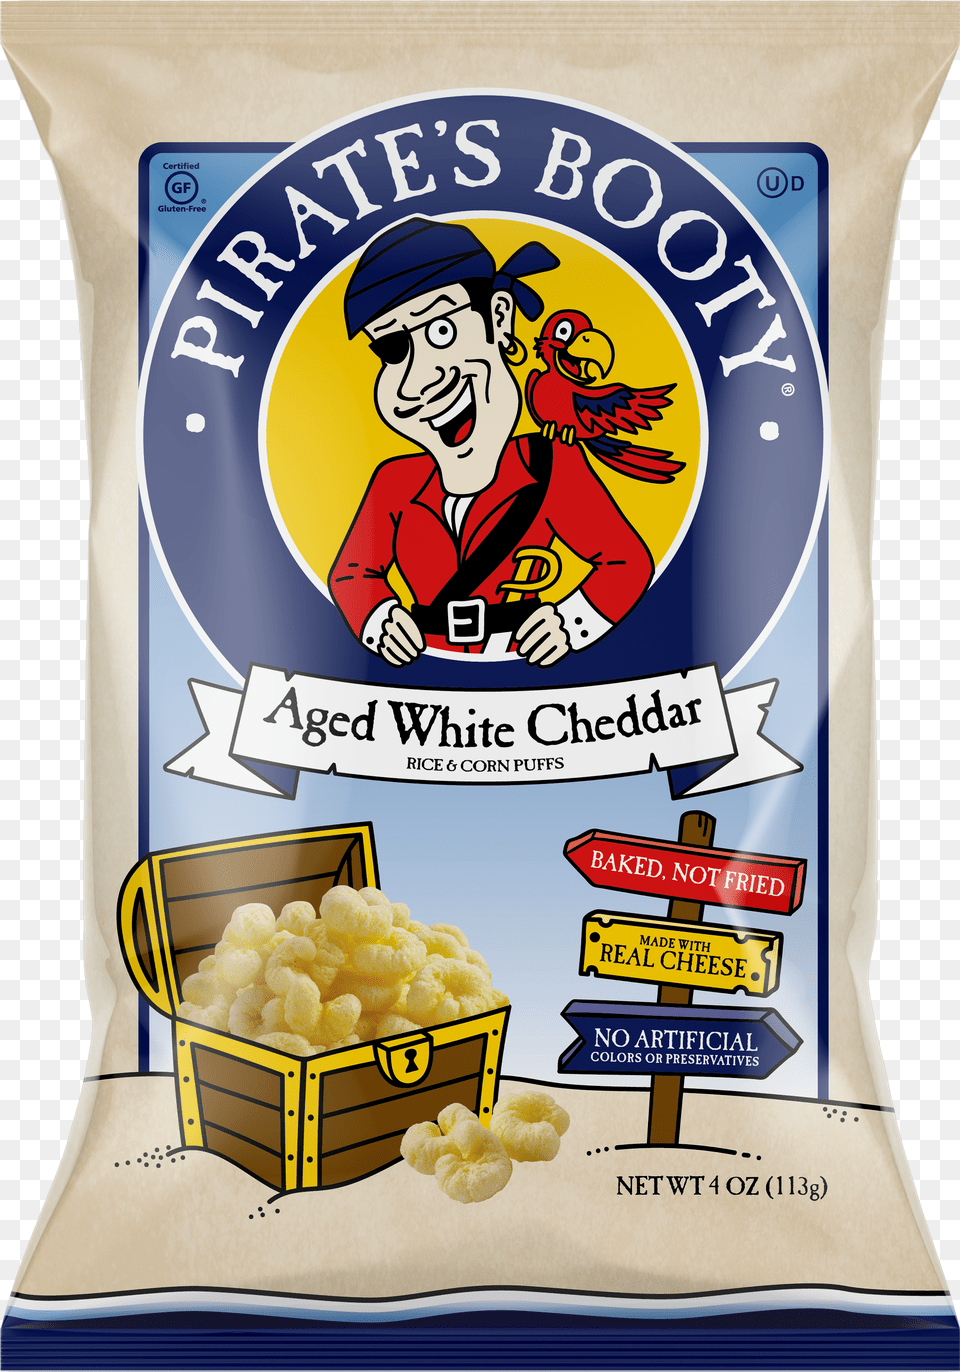 Booty Aged White Cheddar, Weapon, Dynamite, Symbol Png